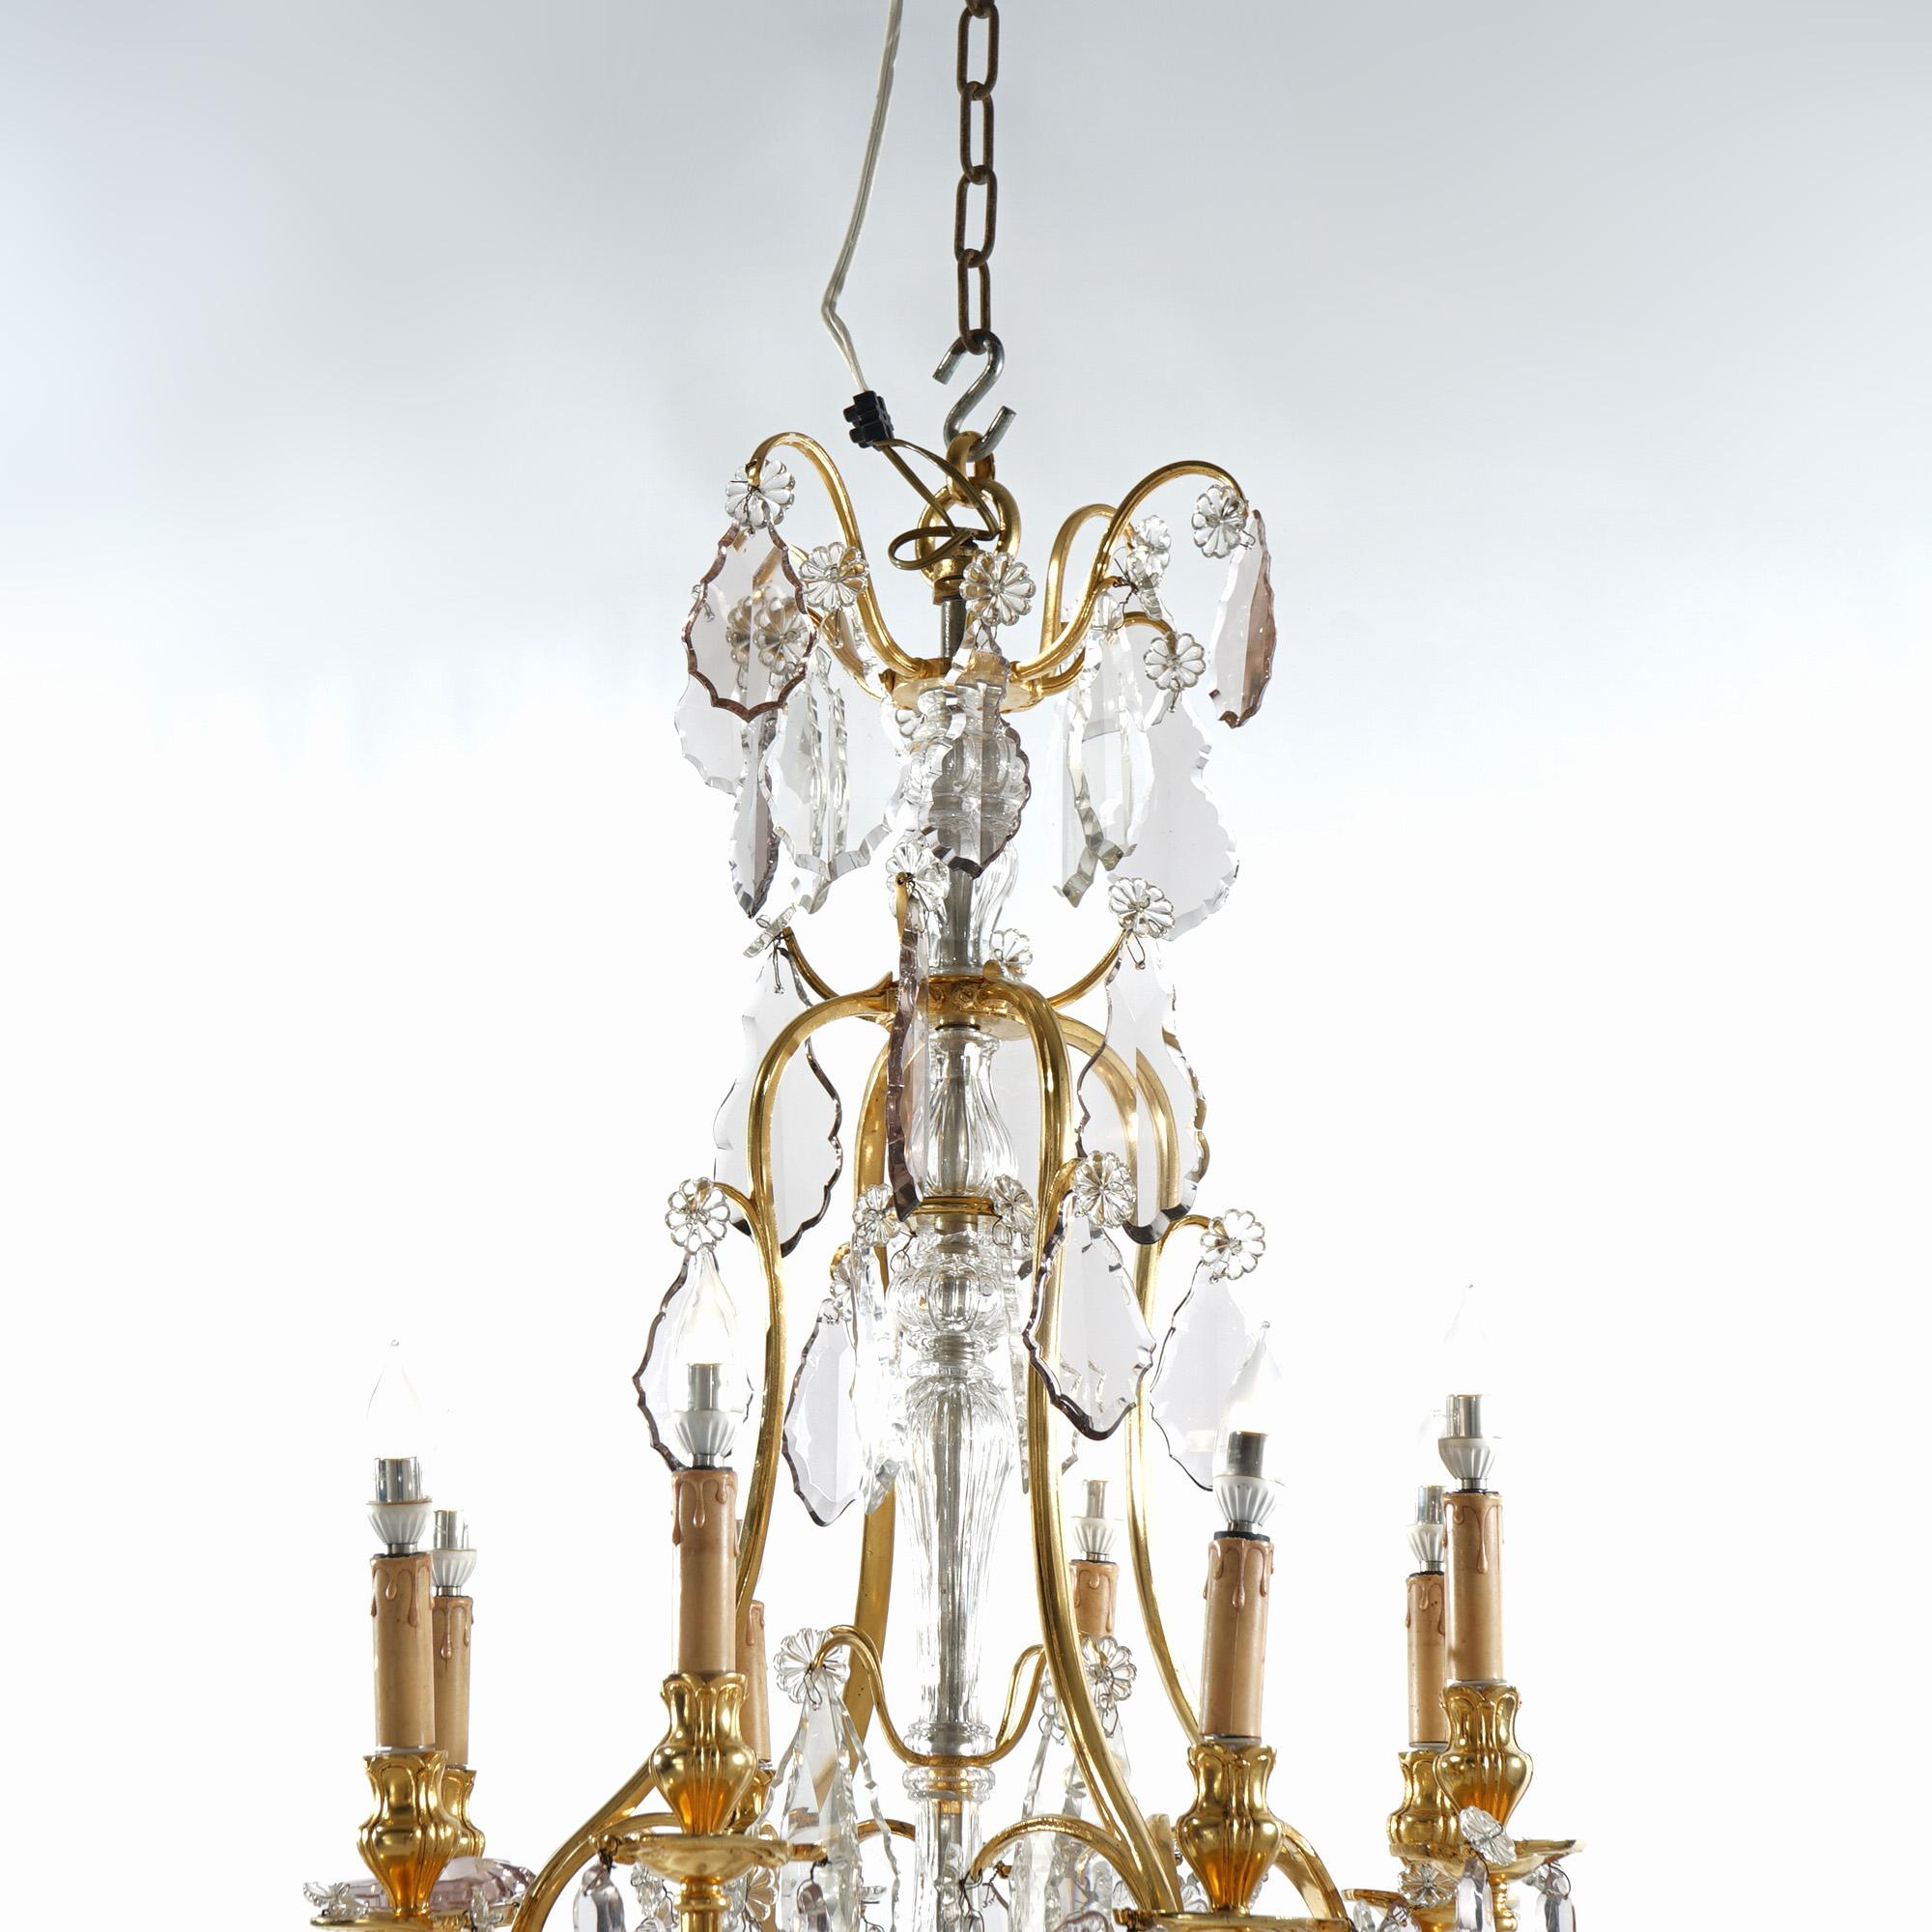 French Louis XIV Style Gilt Bronze & Chrystal 8-Light Chandelier 20th C 4